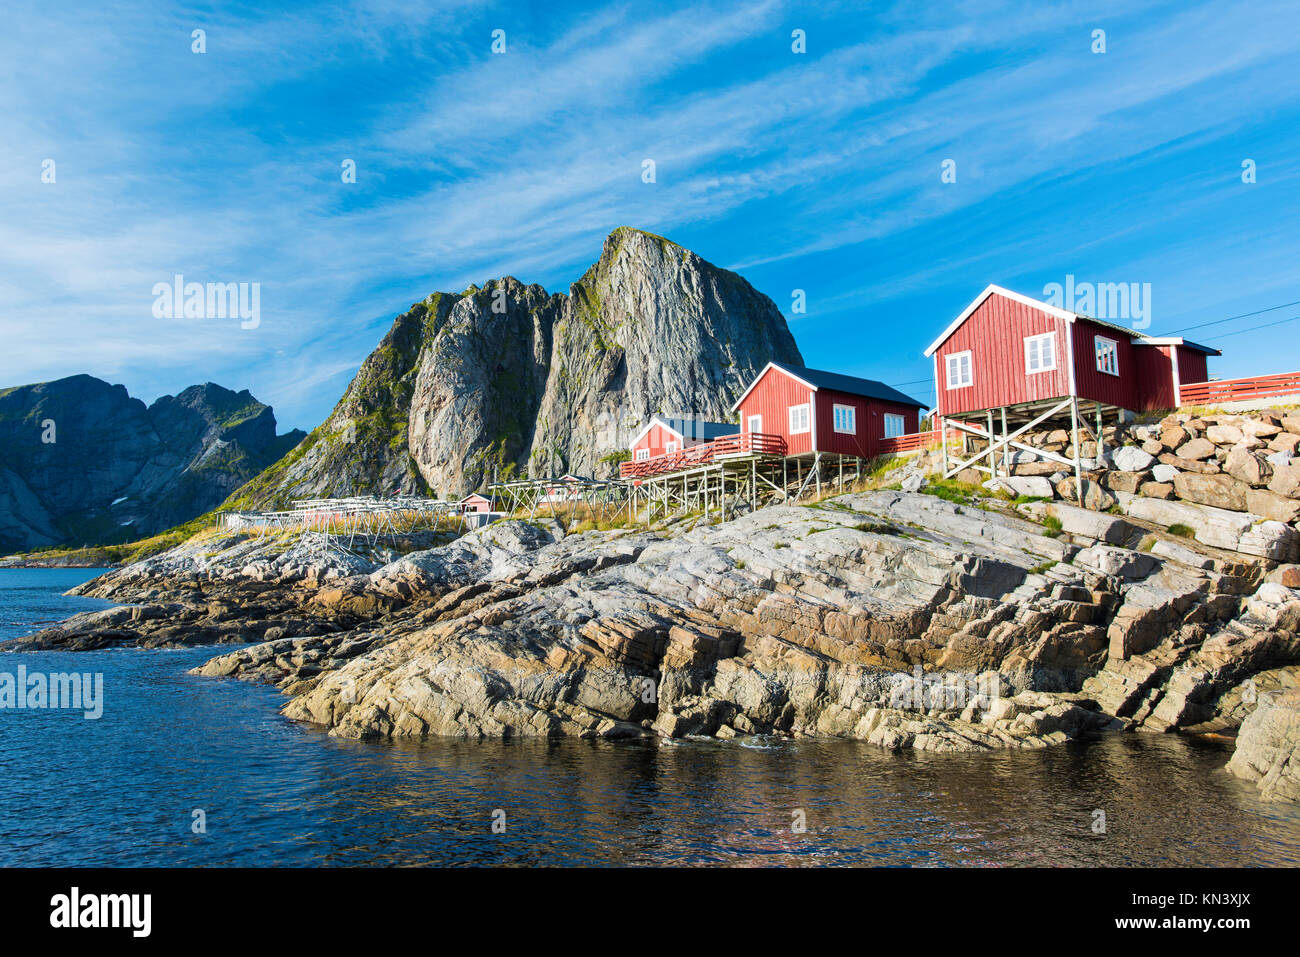 Rorbuer, traditional fisherman's cottages, in Reine, Norway Stock Photo